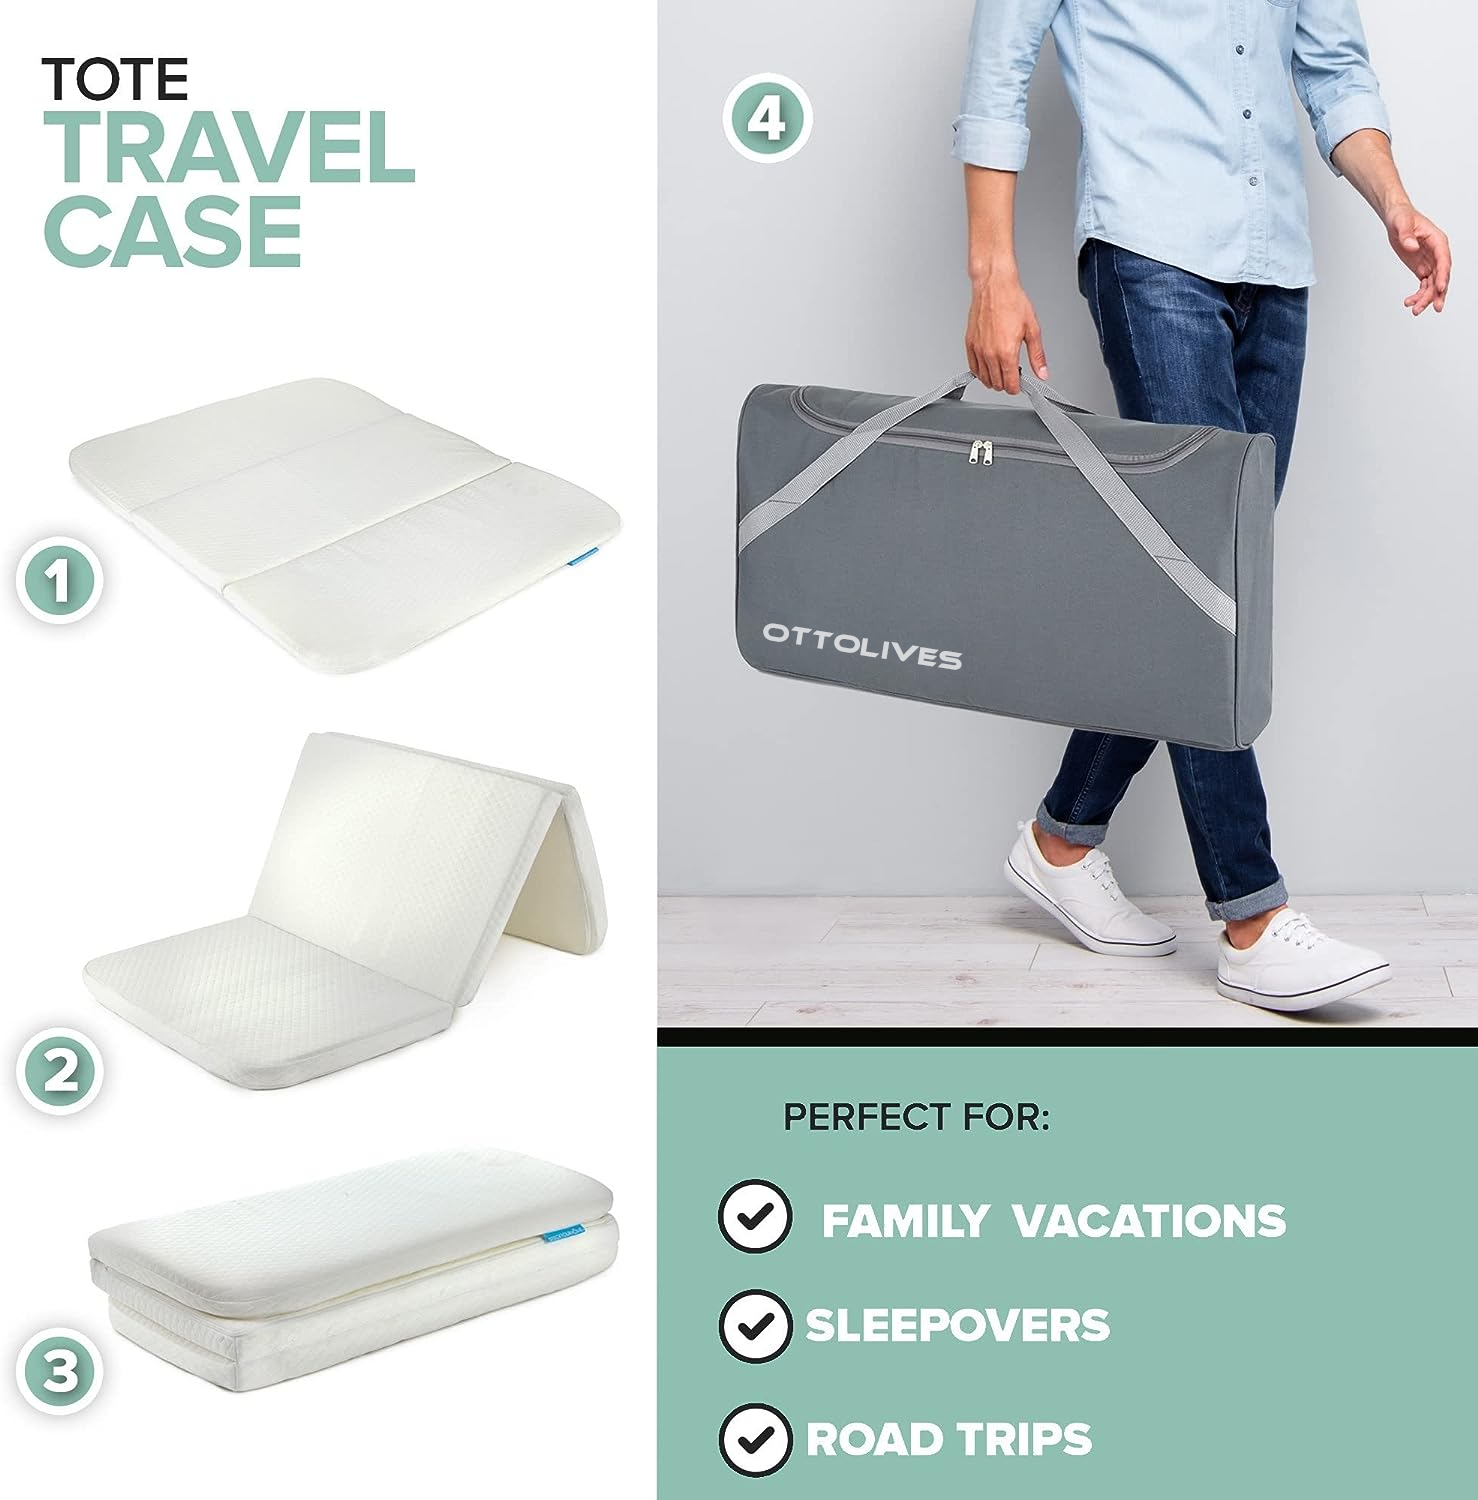 OTTOLIVES Foldable Travel Pack n Play Mattress Pad with Bag, Waterproof Portable Mini Crib Mattresses, Baby Bed Playpen Memory Foam Topper, Playard Pen Accessories, Traveling Case Included